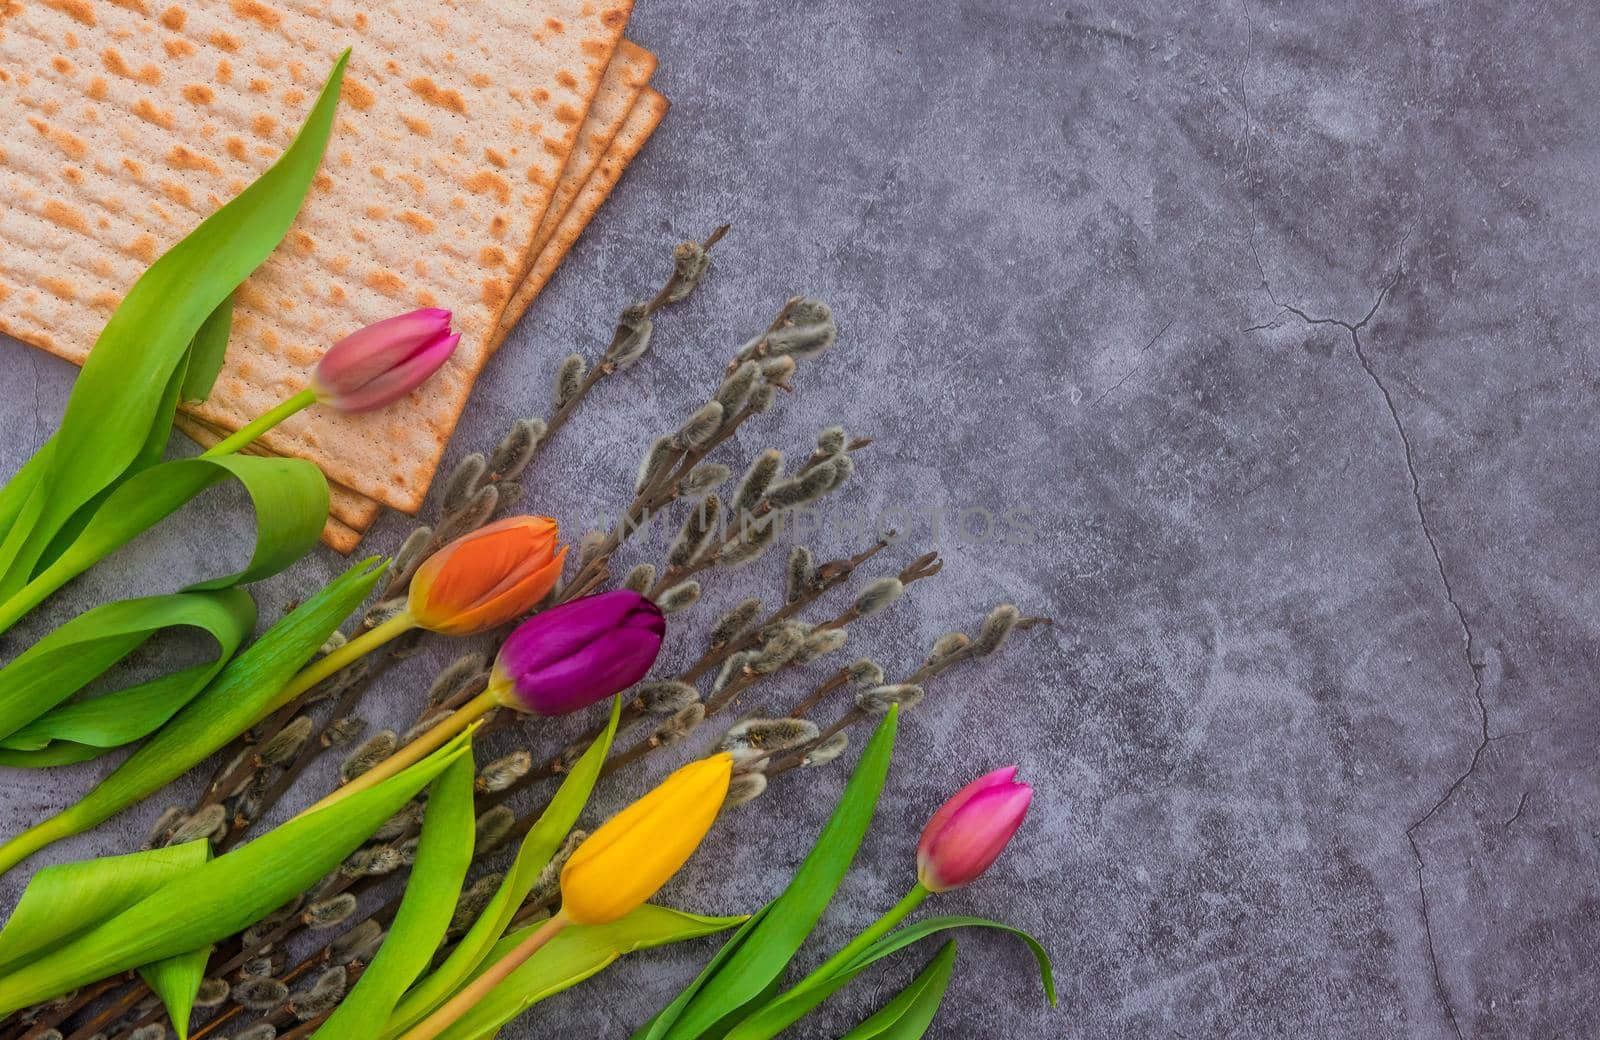 Blessings Pesach Jewish traditional holiday on Passover celebration of flowers and matzah bread the ceremony ritual